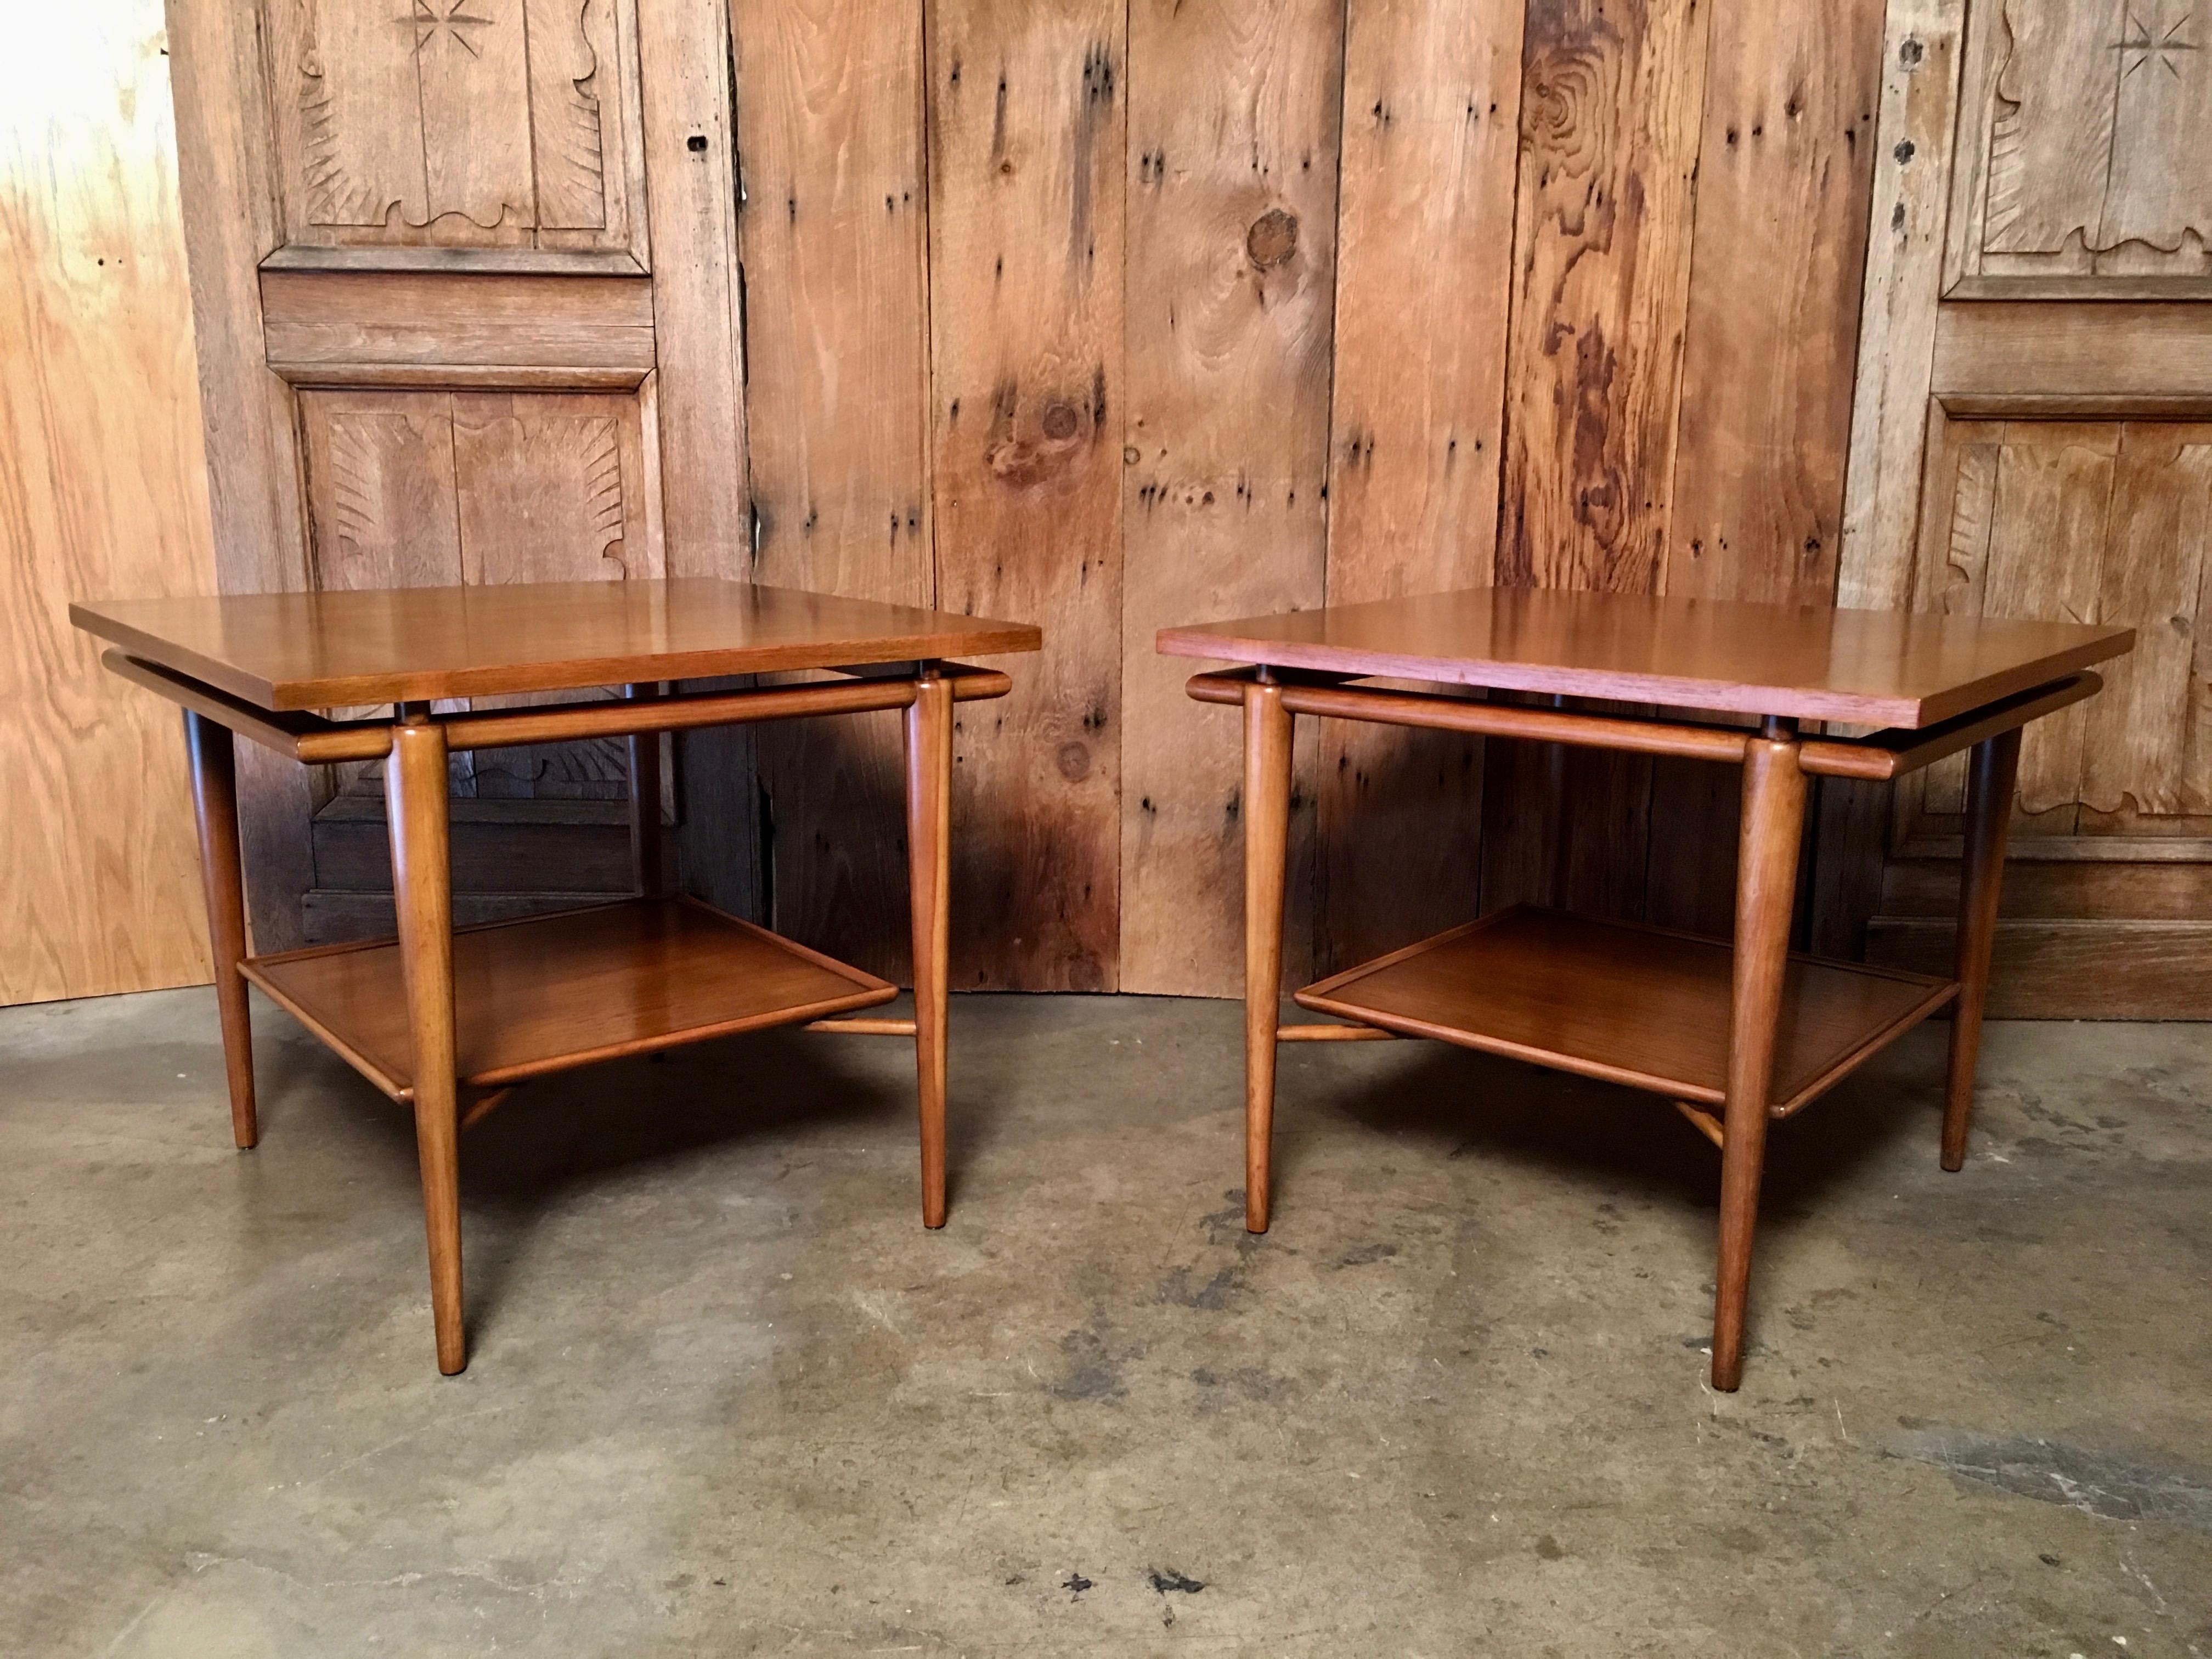 Pair of two-tiered end tables with floating tops in very good original finish.